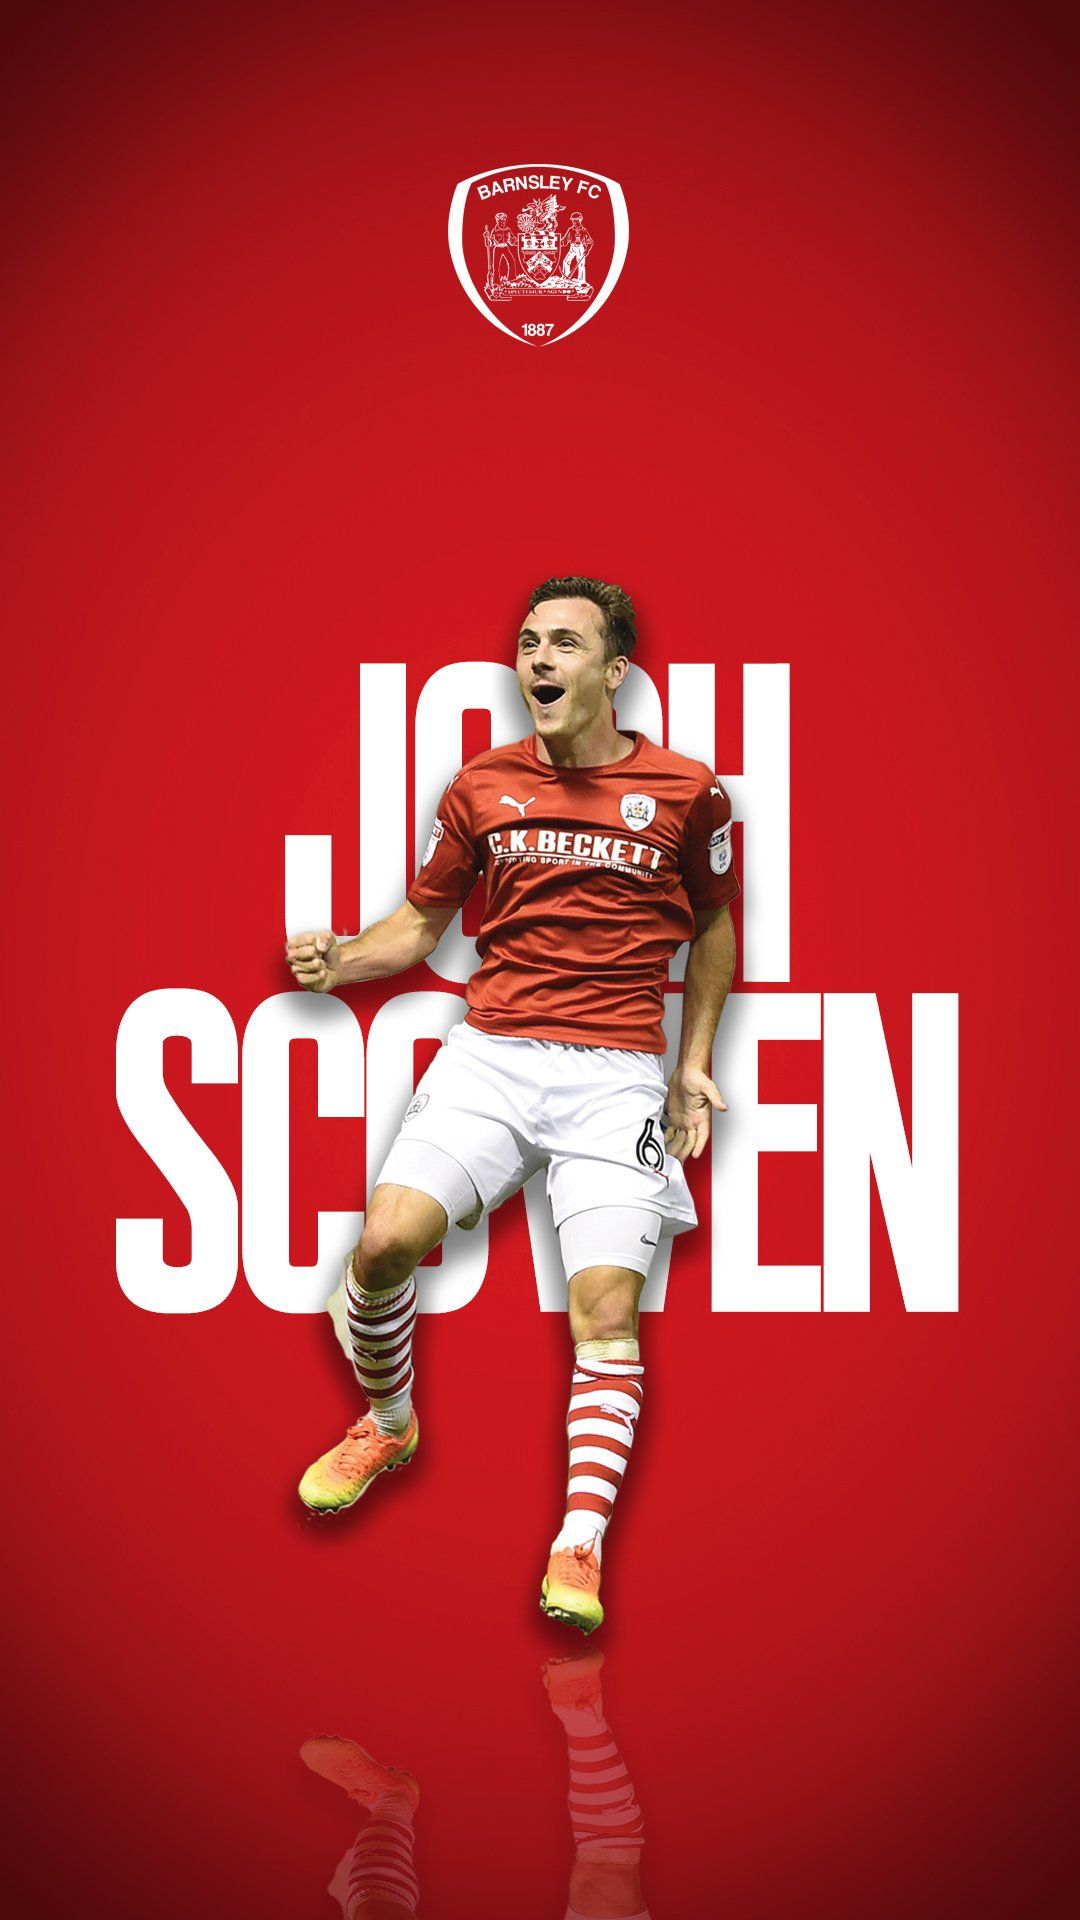 Barnsley FC PHONE WALLPAPER: by popular demand, we're pleased to bring you this free wallpaper! Enjoy! #YouReds